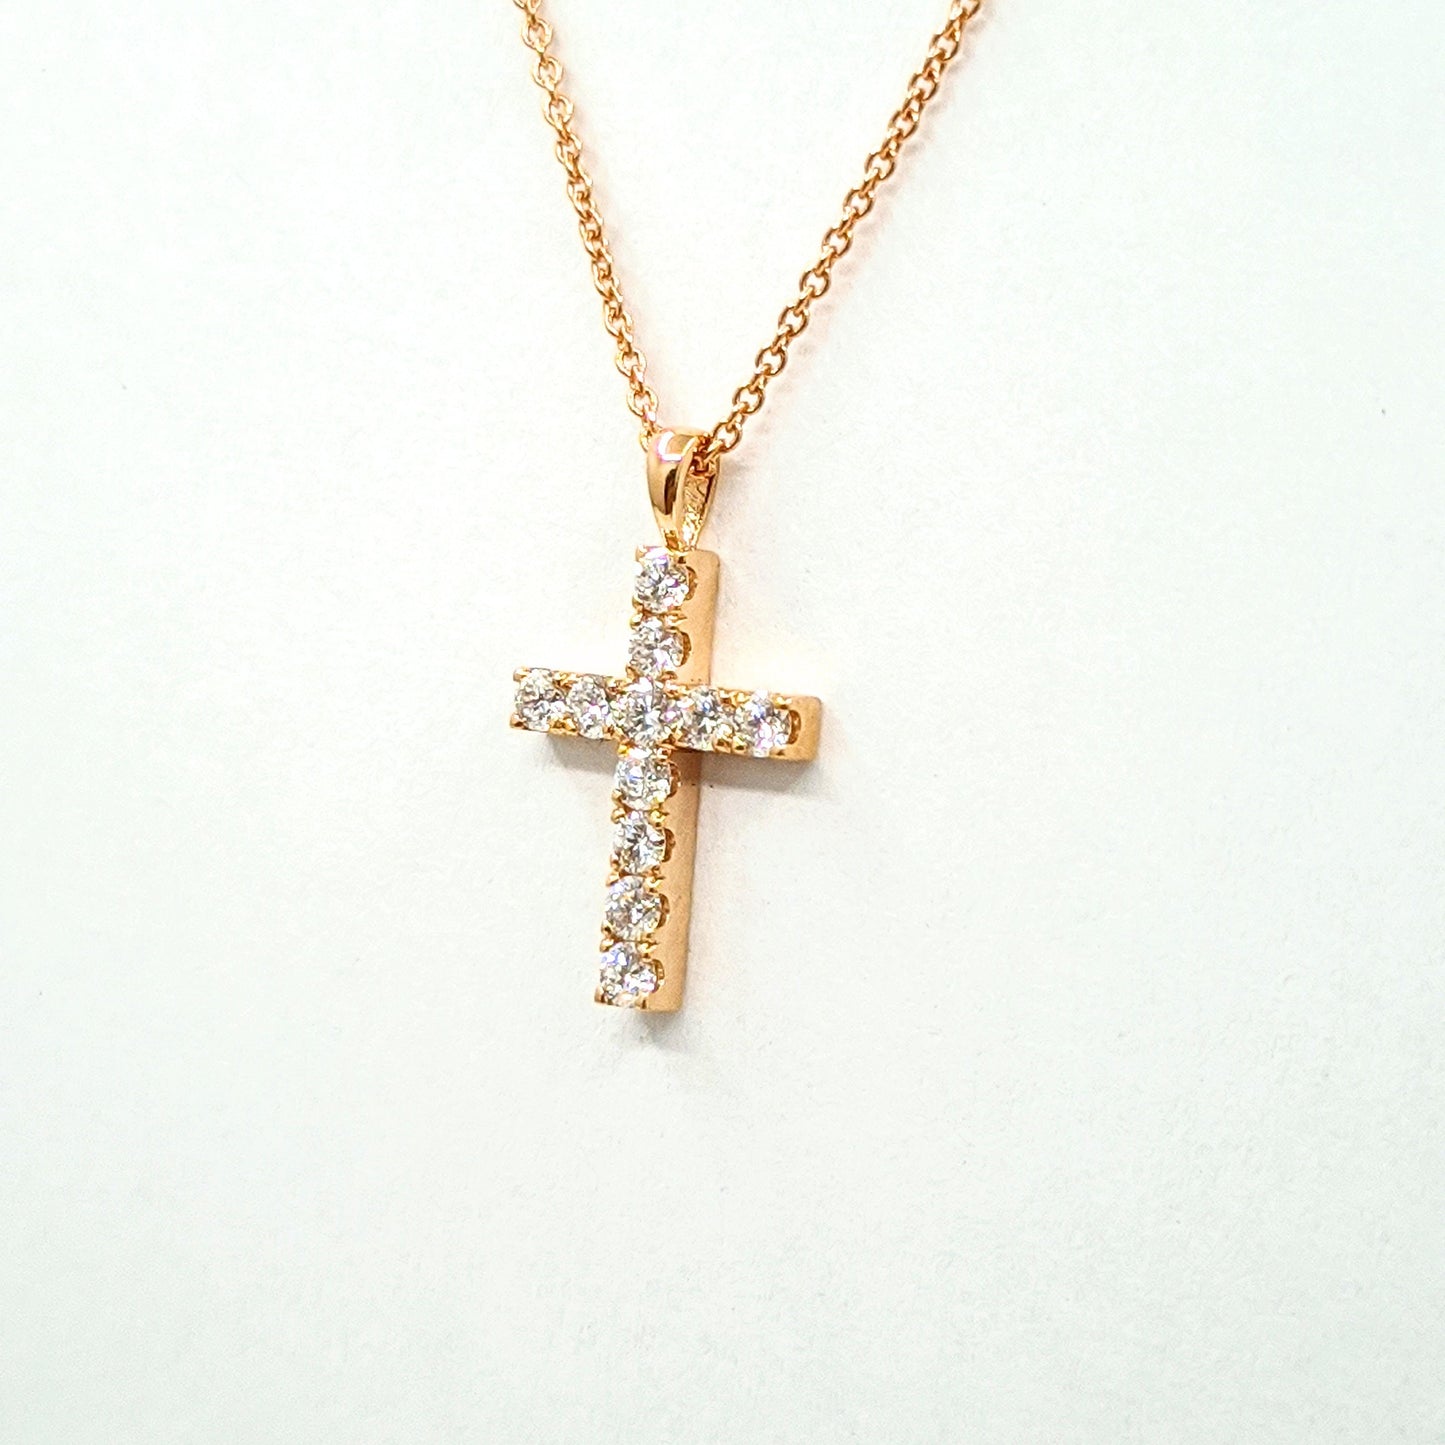 Round Diamond 0.3ct small Pendant/ Dainty Simple Cross Necklace / Adjustable Length /14K Gold Cross Necklace / Gift for Her